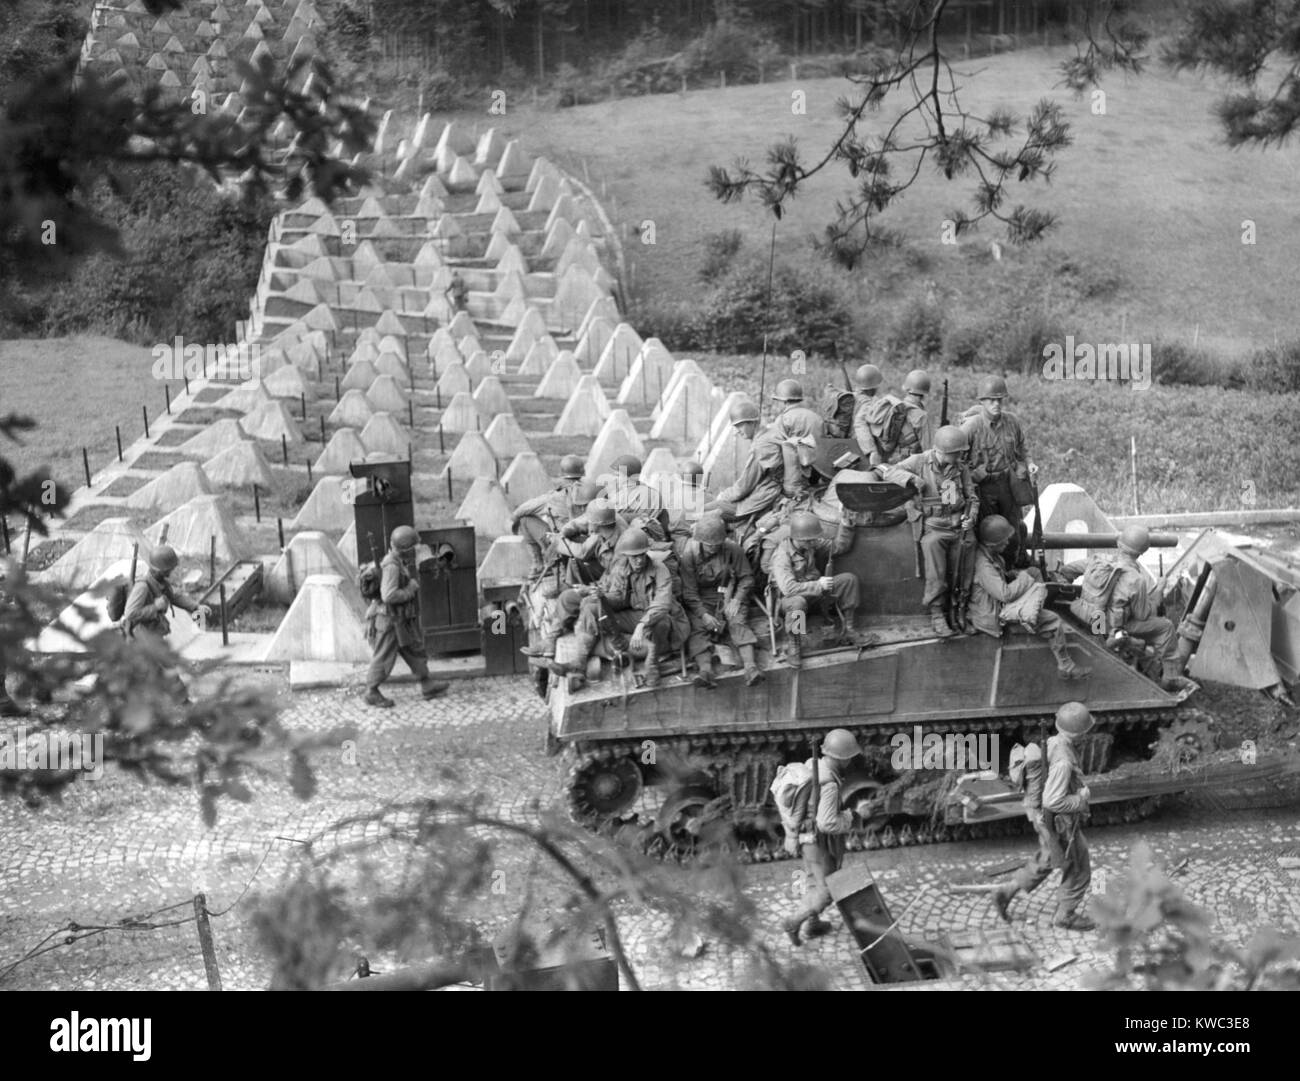 Americans roll through Siegfried Line on a 'tank dozer' near Roetgen, Germany, on Sept. 28, 1944. Roetgen was the first German municipality he captured by US troops during World War 2 (BSLOC 2015 13 67) Stock Photo